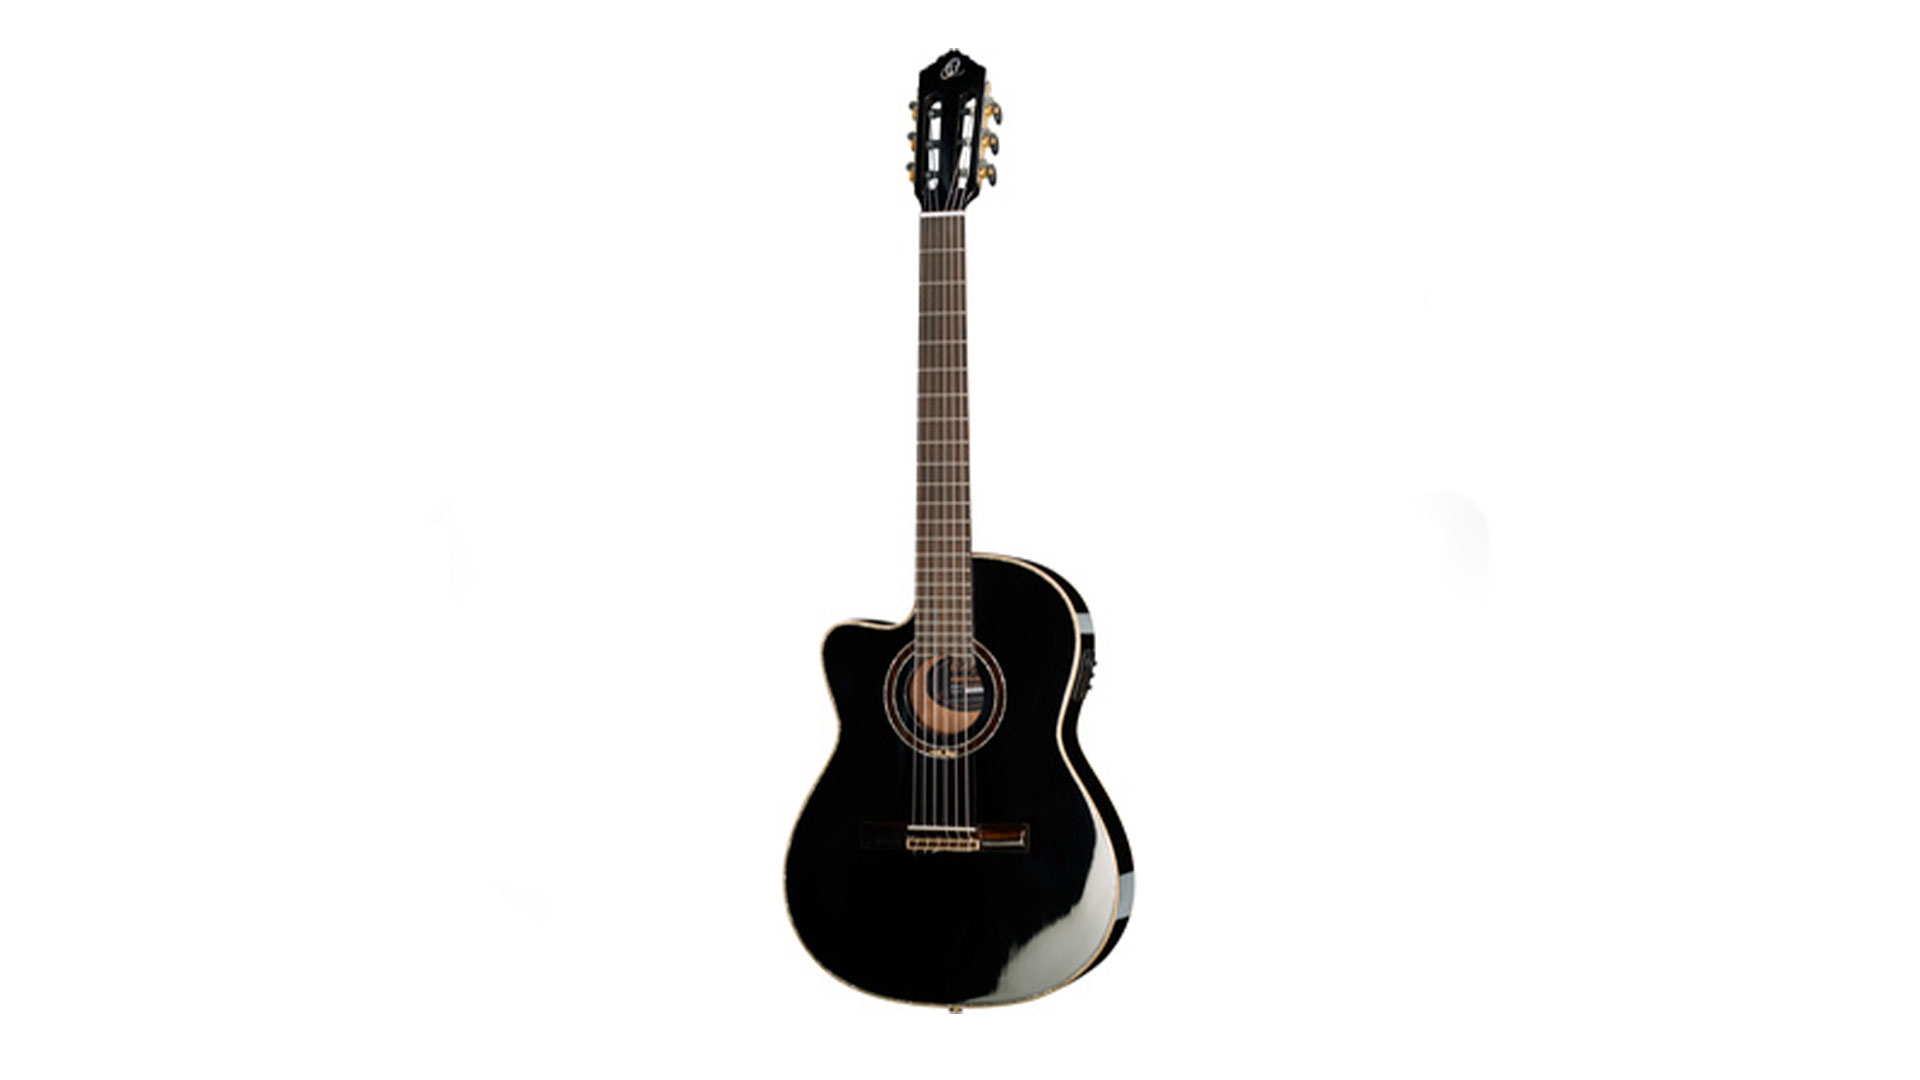 Top Lefthanded Classical Guitars